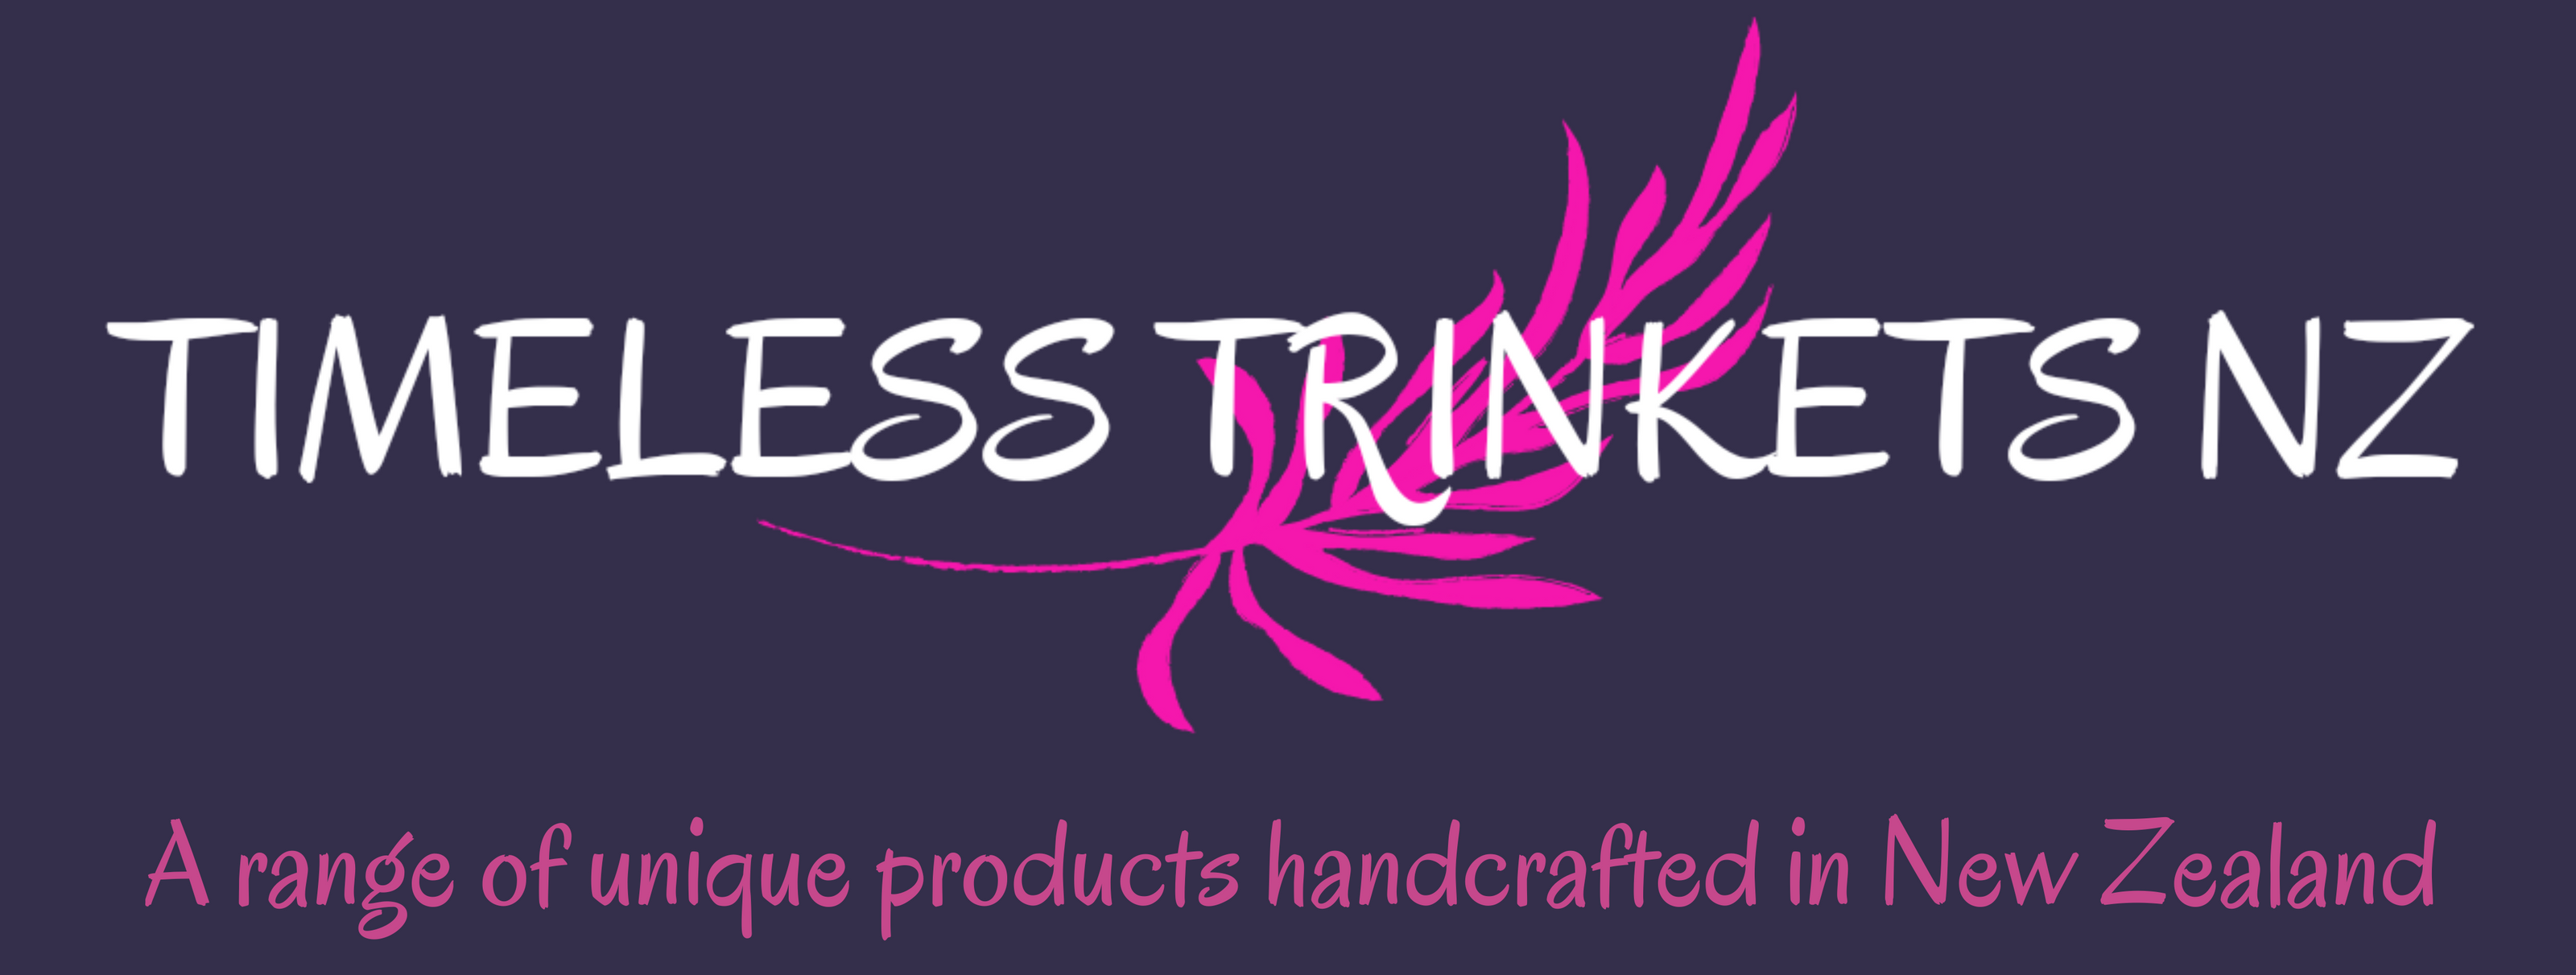 Timeless Trinkets NZ. A range of unique products handcrafted in New Zealand